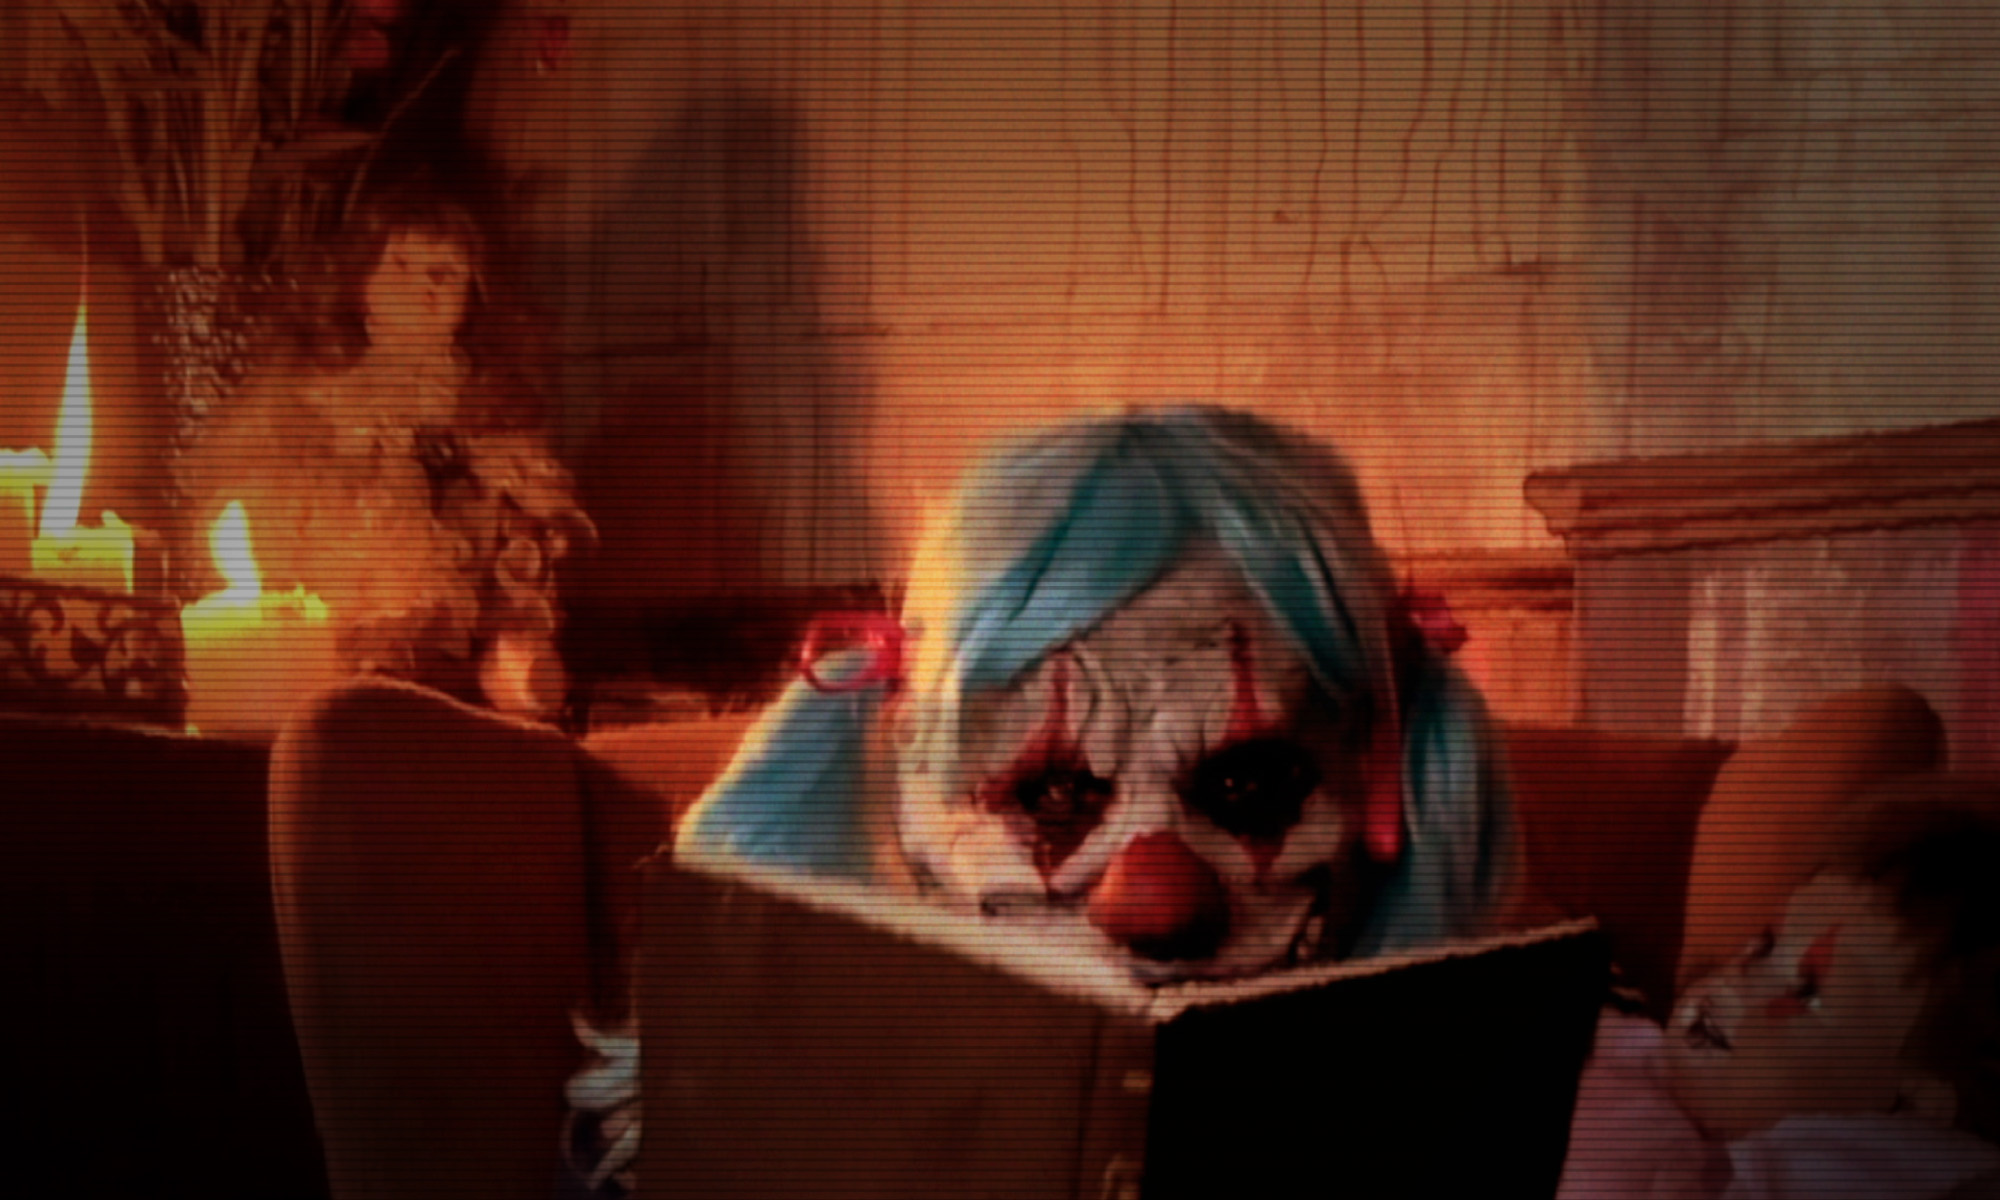 It's FearFest-Evil storytime with Mr Gacy